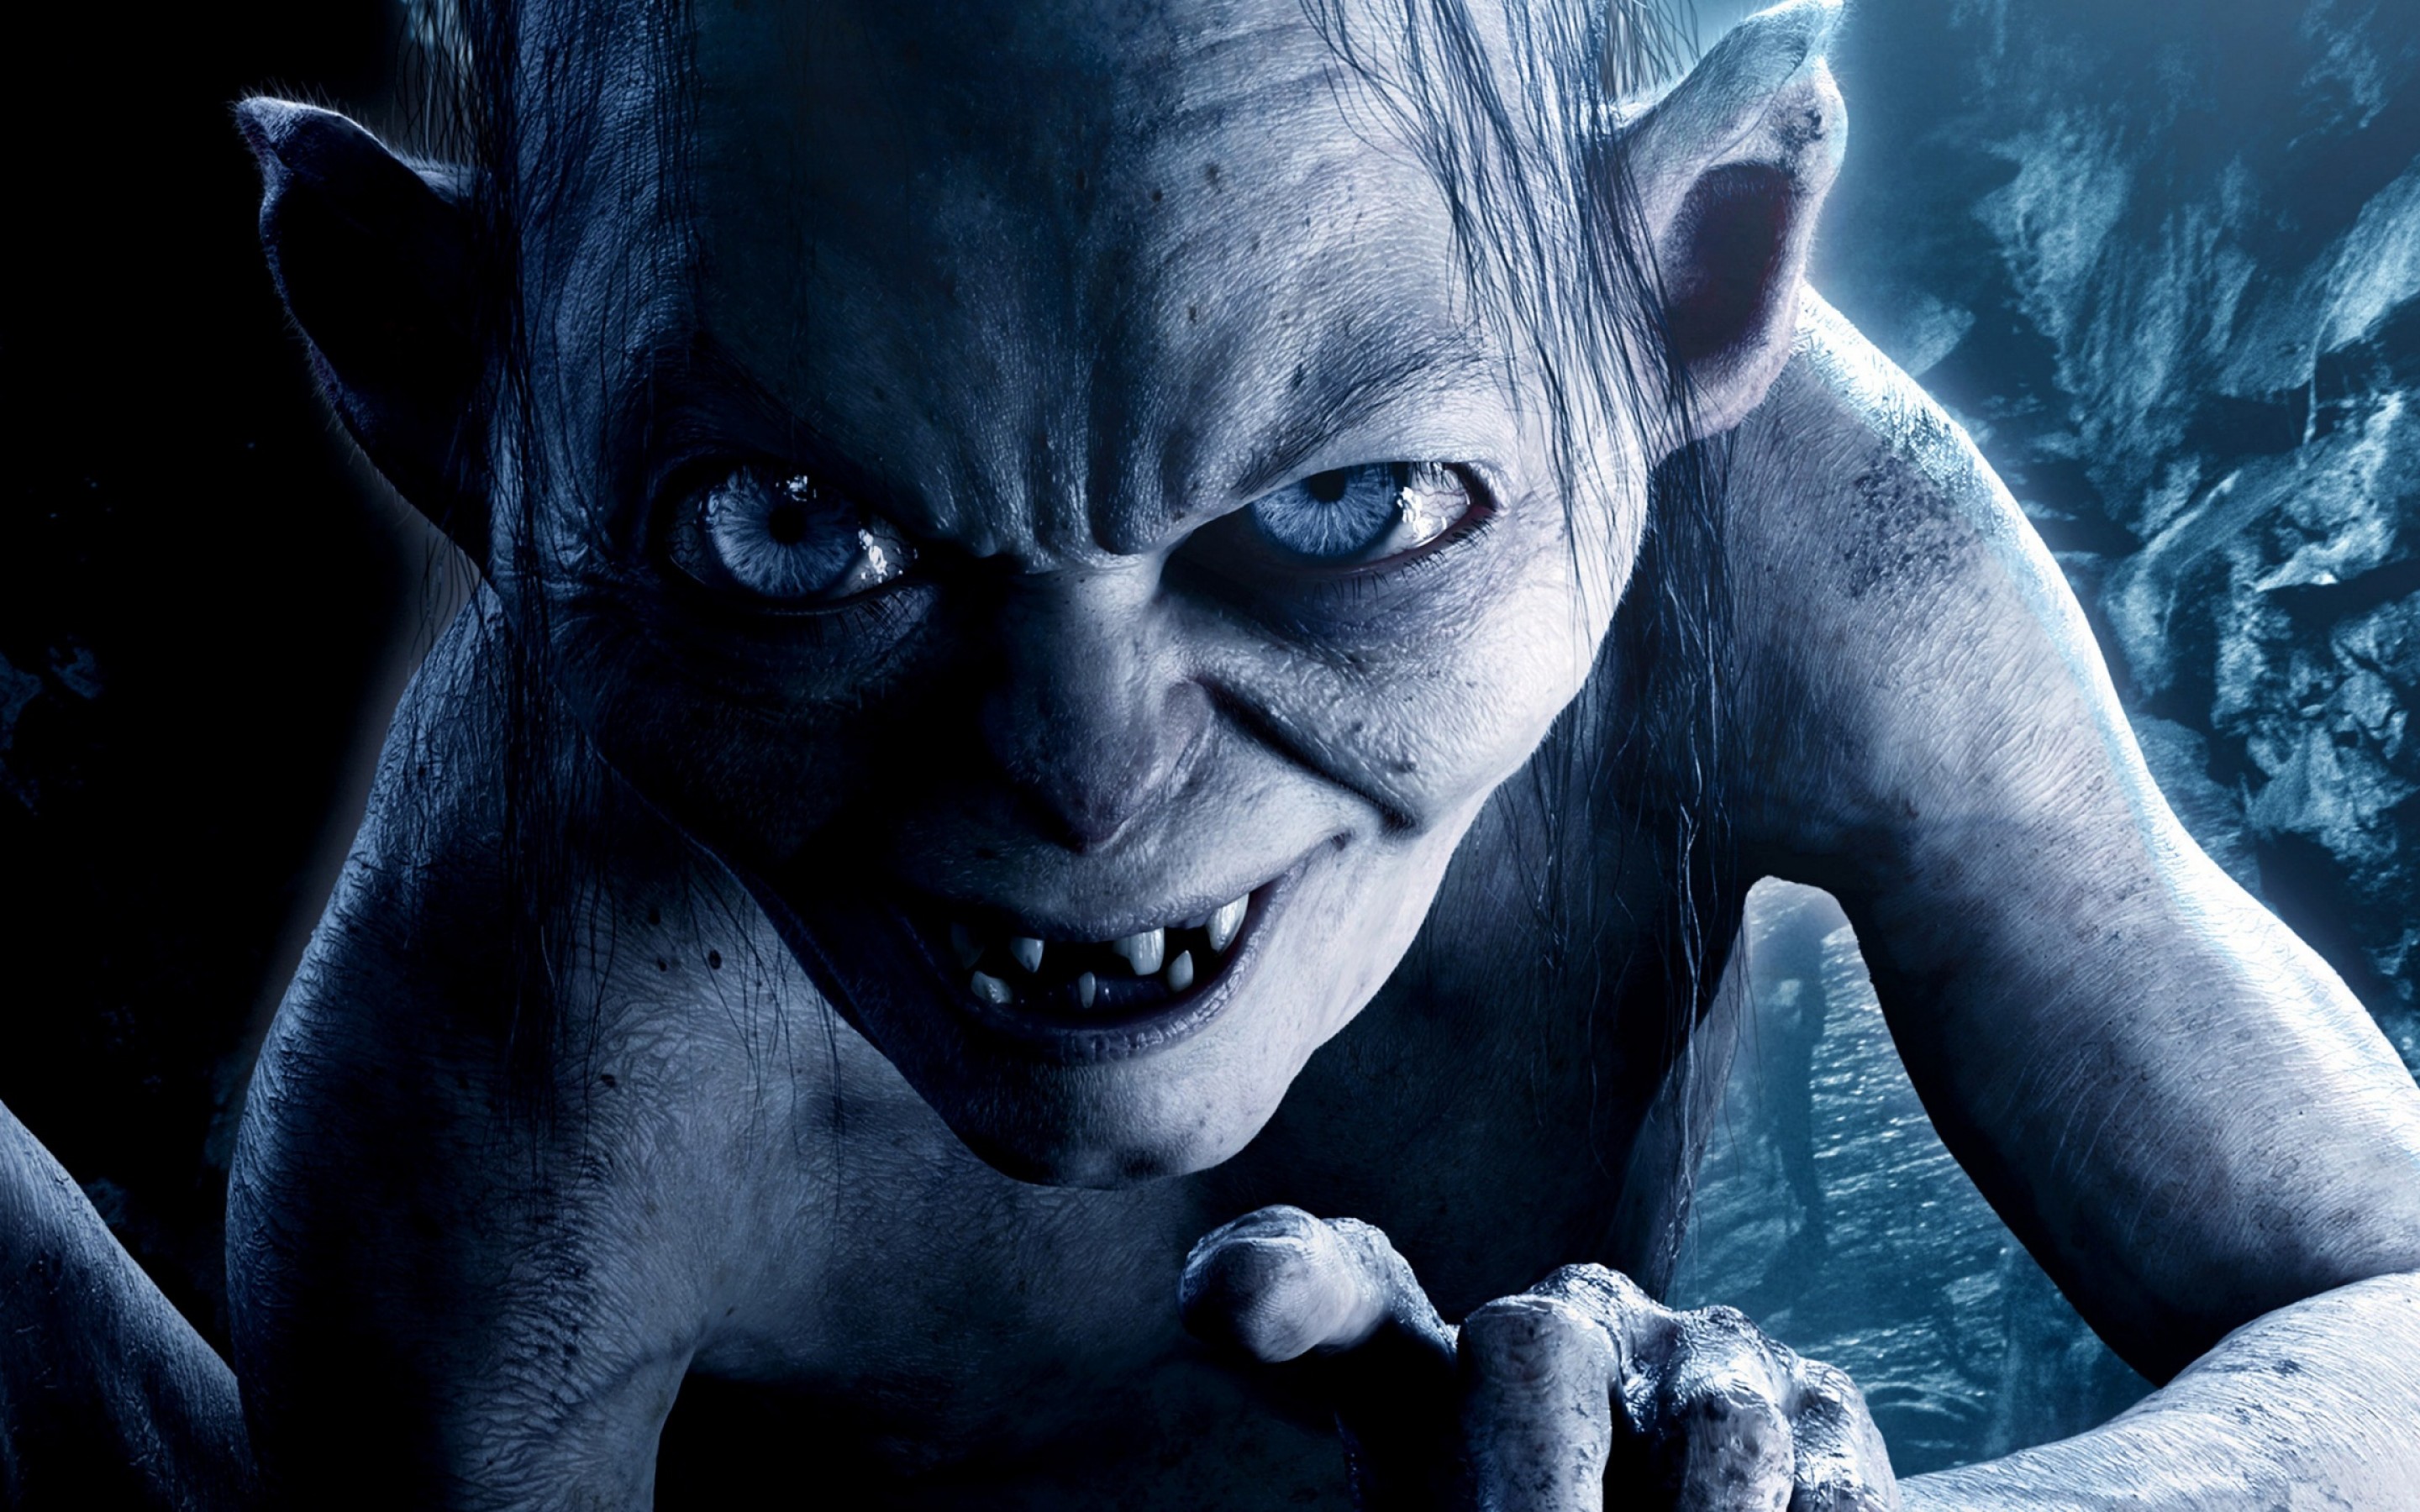 Gollum Lord of the Rings wallpaper movies and tv series Wallpaper Better